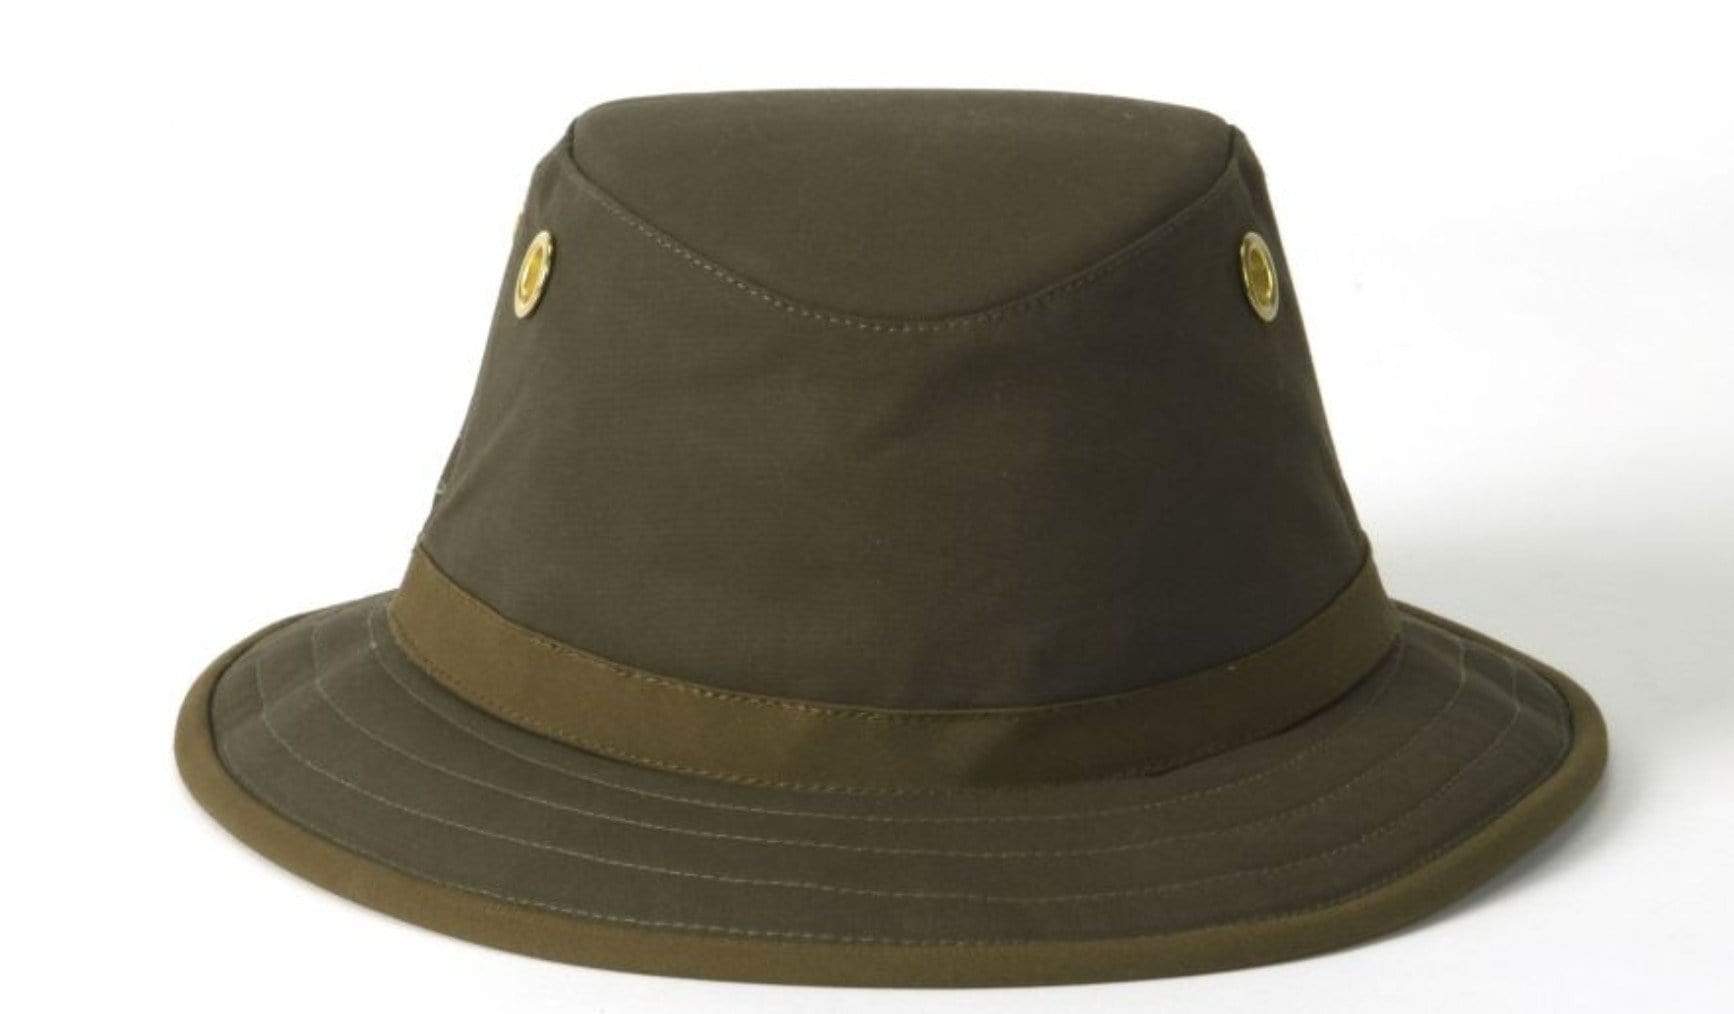 Tilley Hats 61.5 cm (7 3/4) / Green Tilley Outback Waxed Cotton Hat TWC7